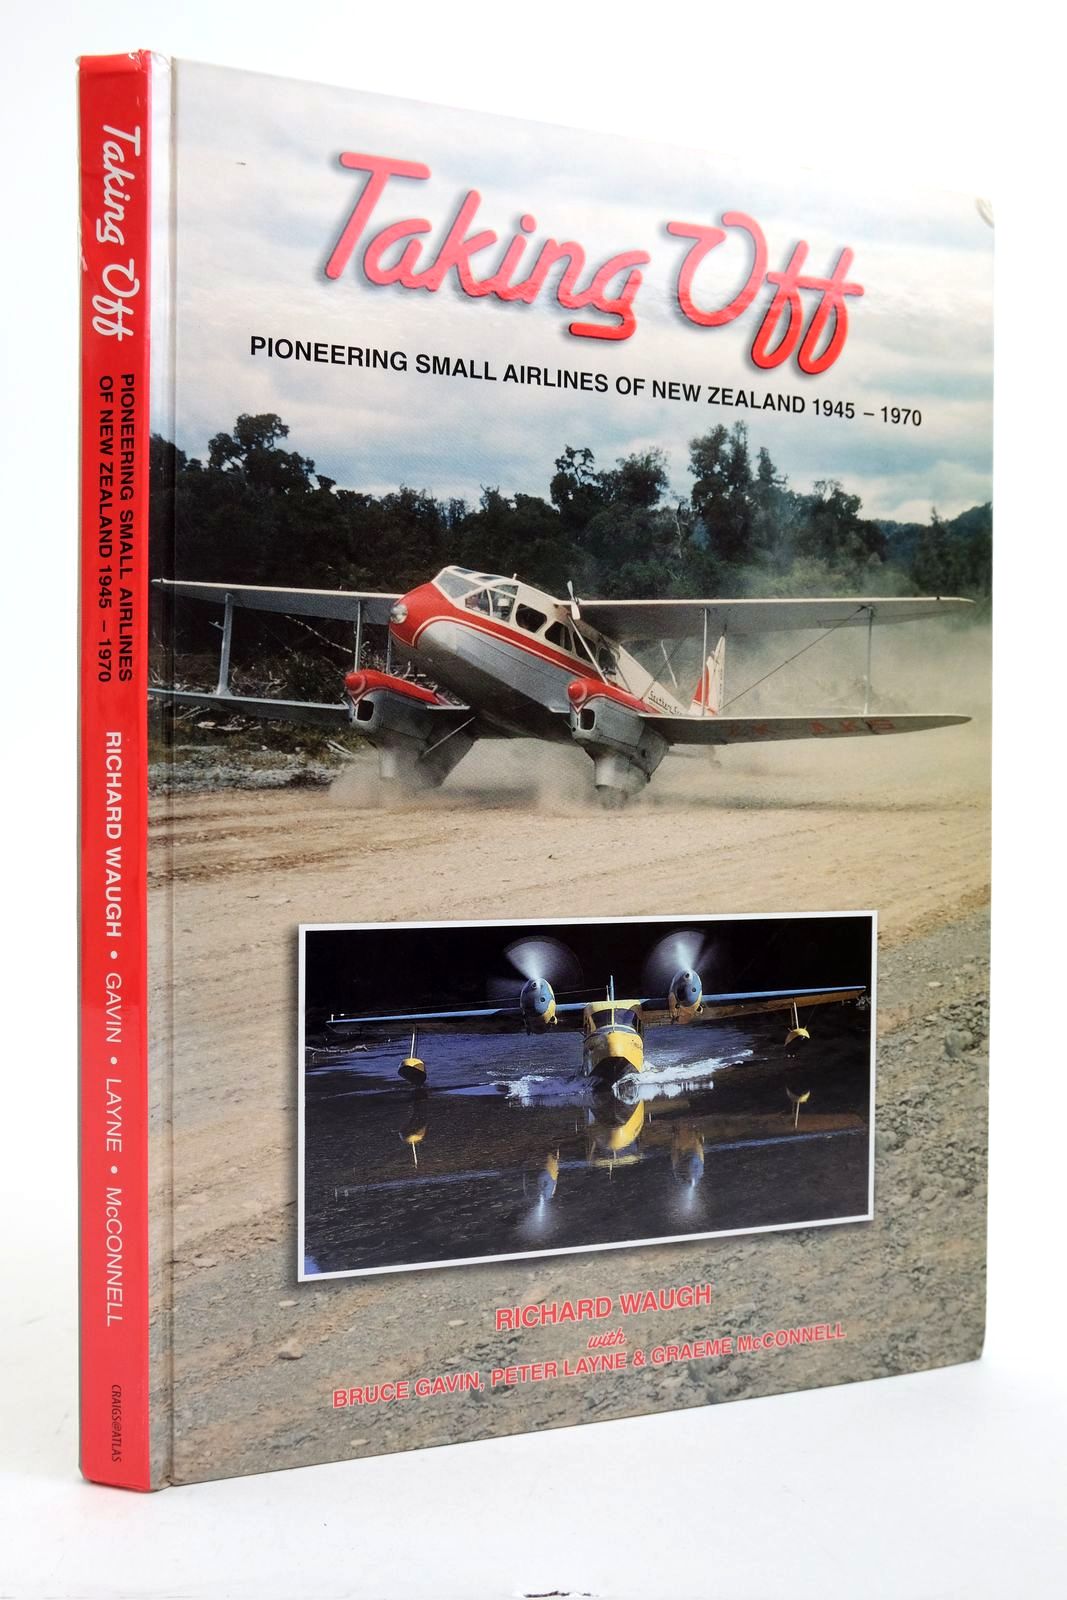 Photo of TAKING OFF: PIONEERING SMALL AIRLINES OF NEW ZEALAND 1945-1970 written by Waugh, Richard Gavin, Bruce et al, published by The Kynaston Charitable Trust (STOCK CODE: 2139365)  for sale by Stella & Rose's Books